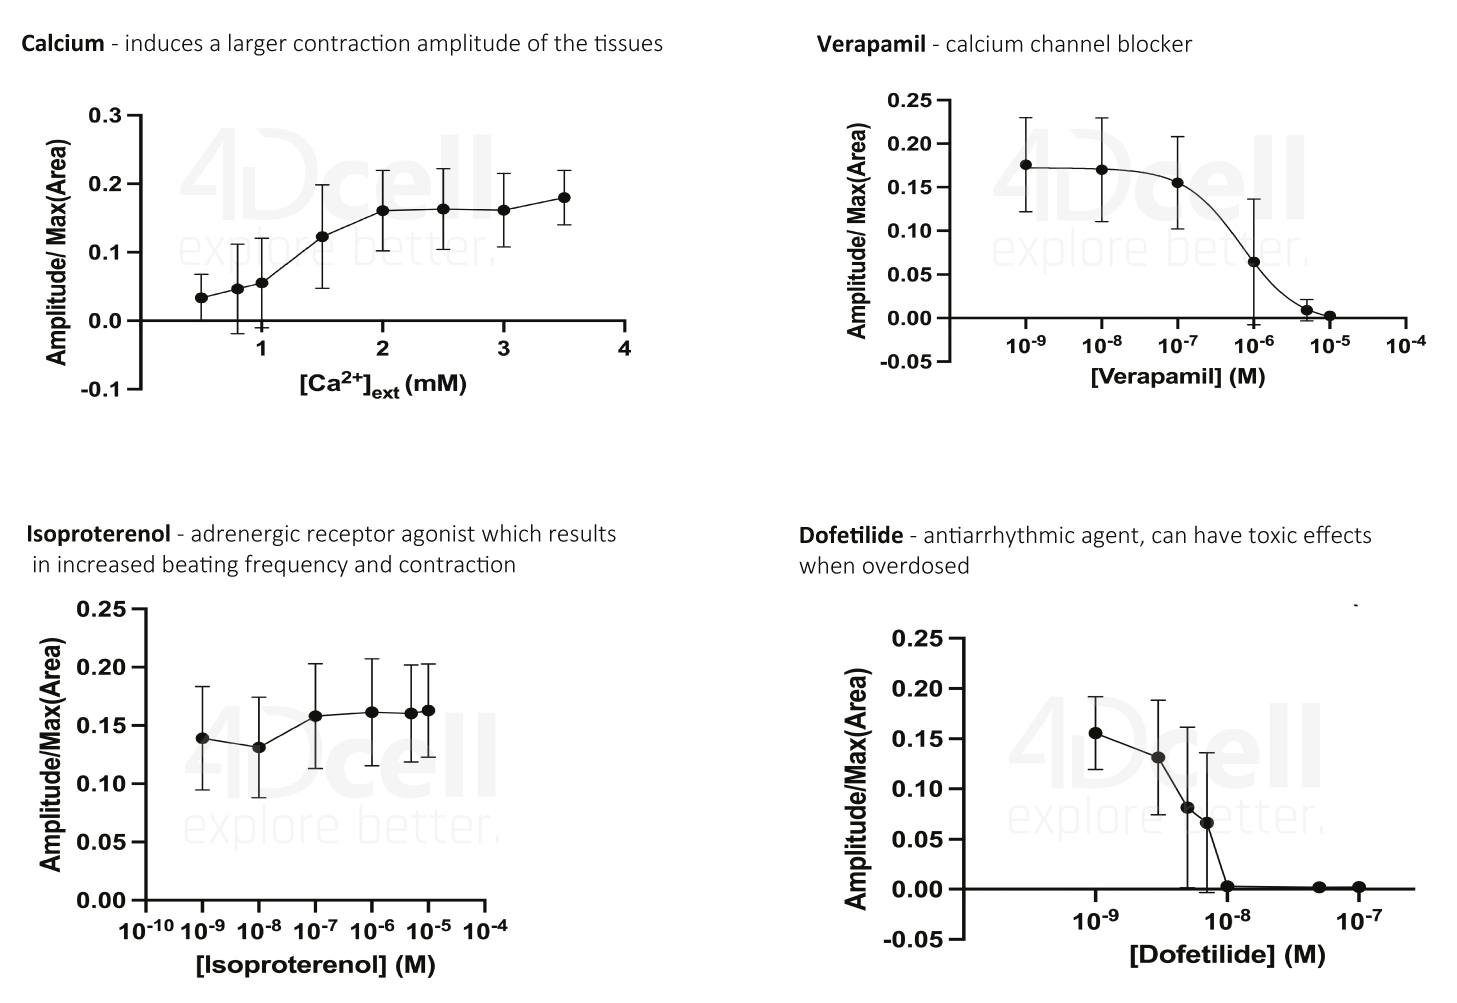 Effets of calcium, verapamil, isoproterenol, dofetilide on 4Dcell Smartheart